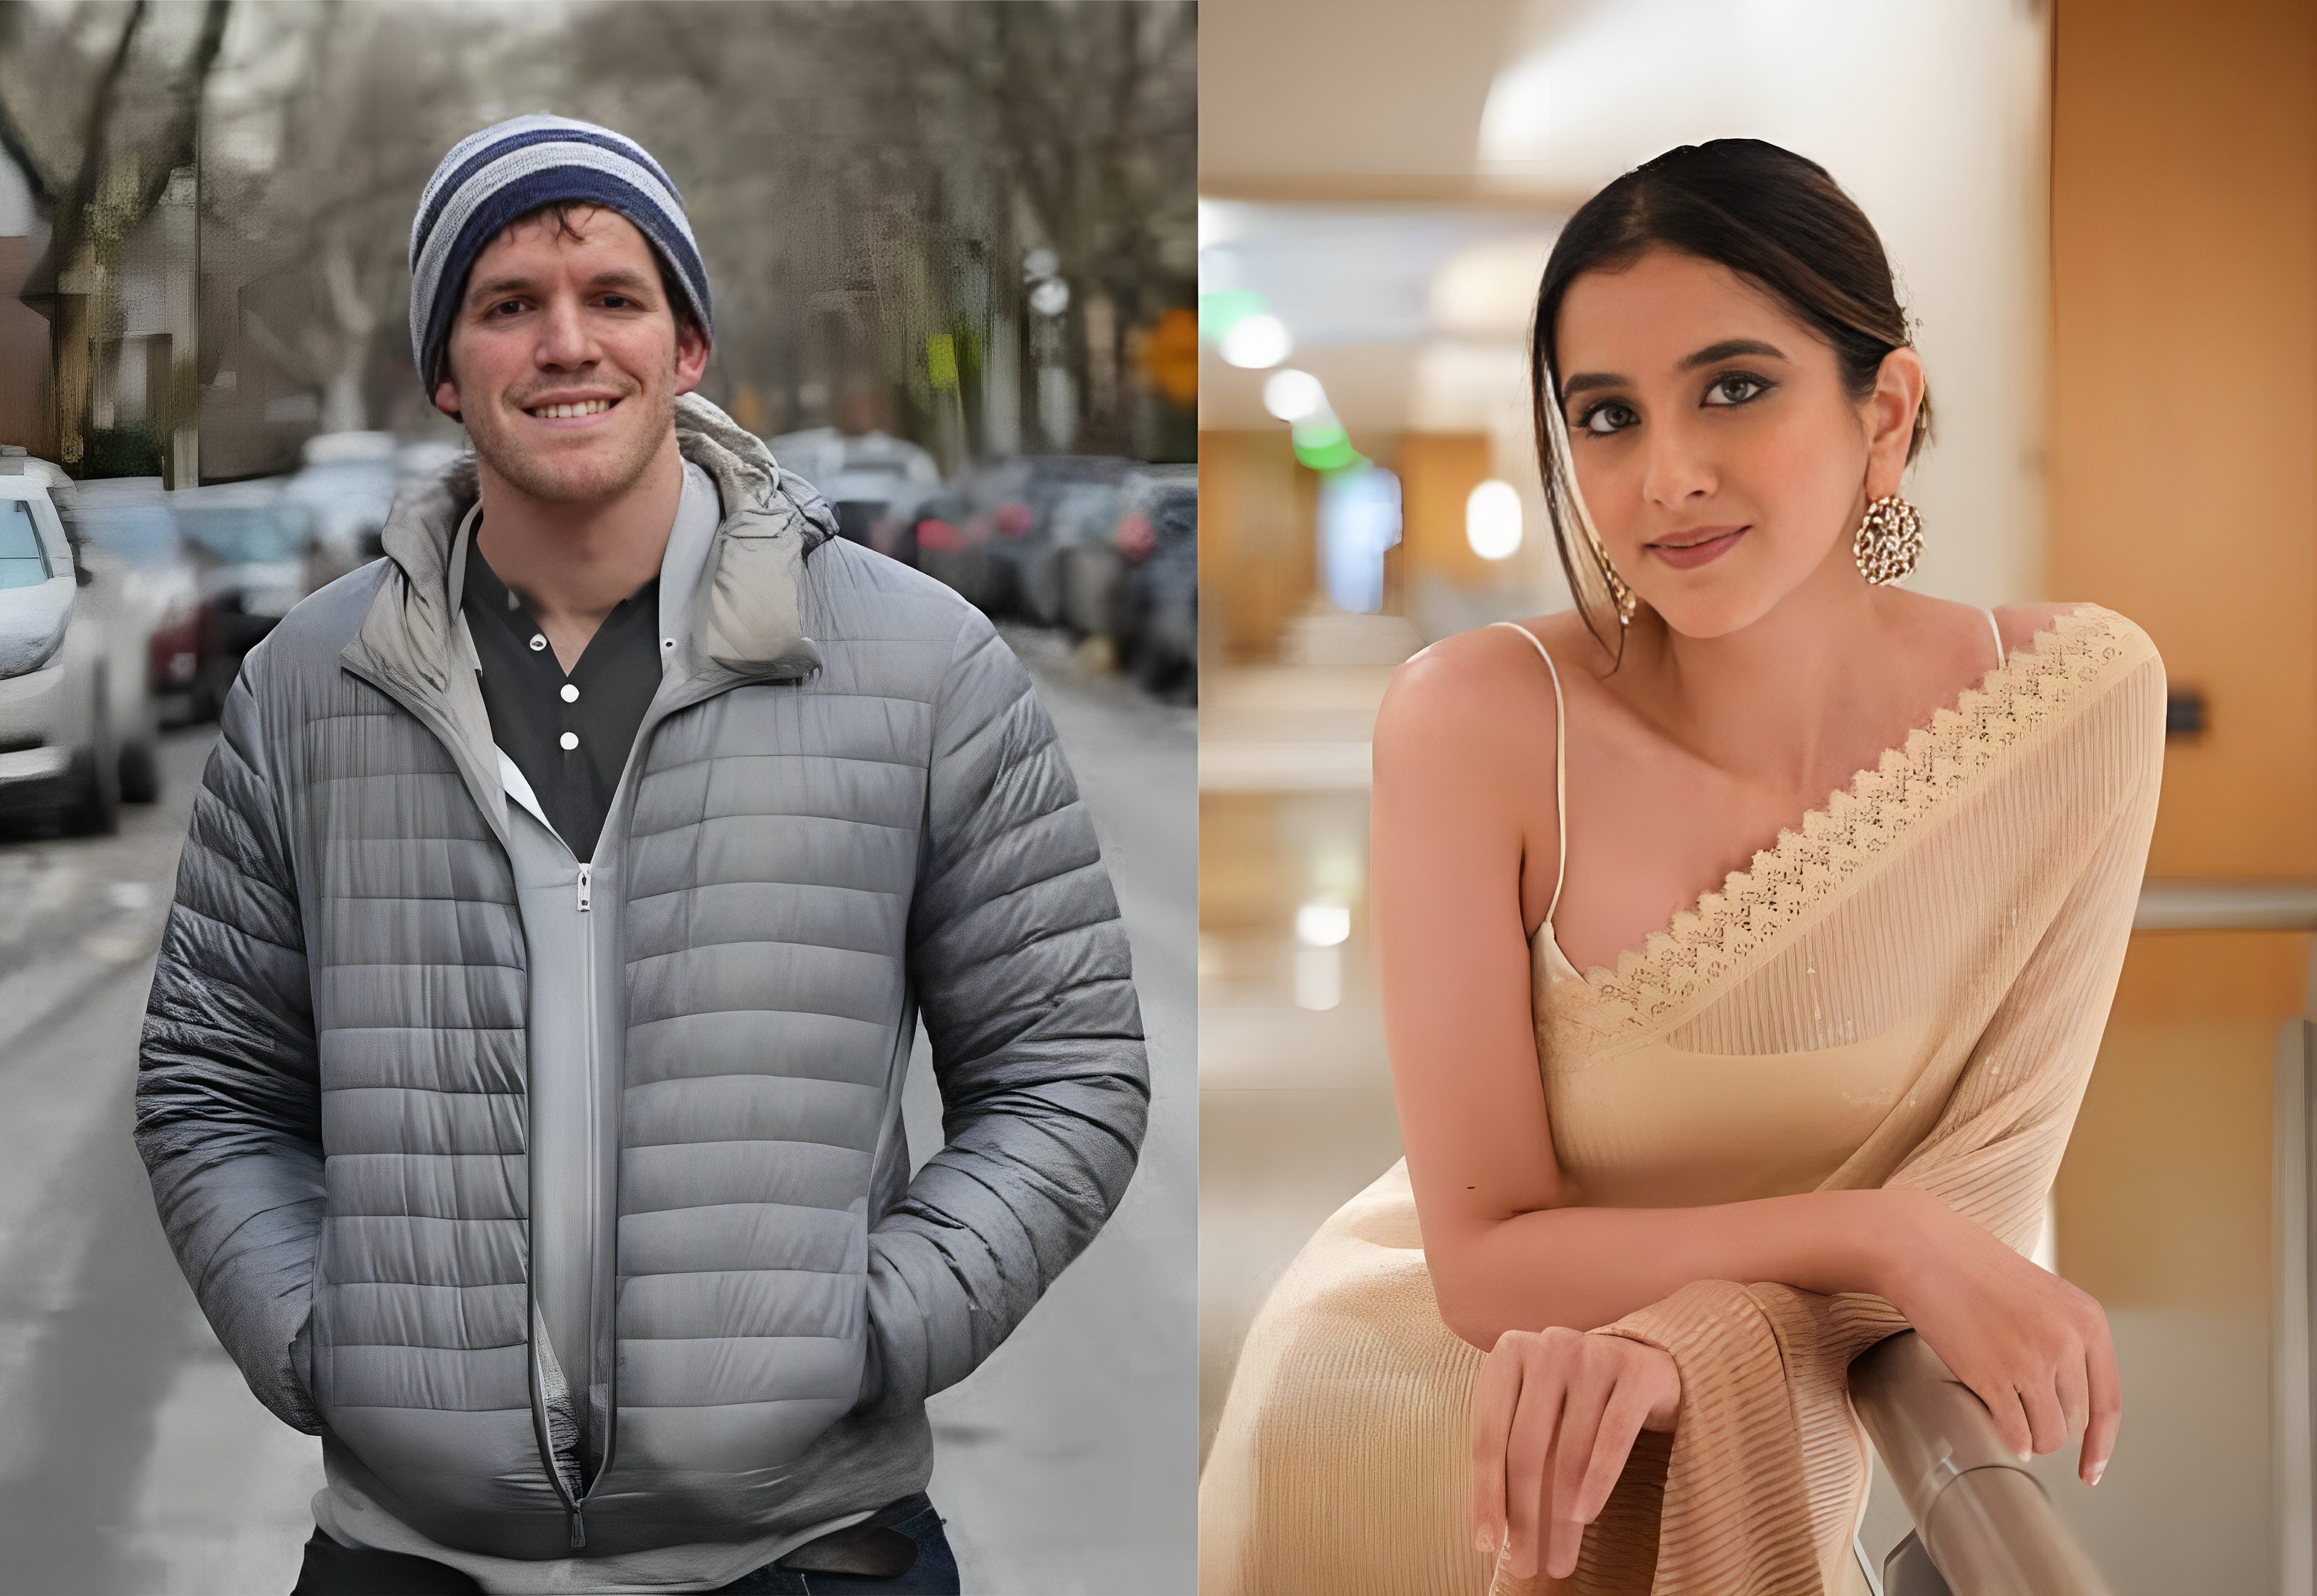 Humans of Bombay vs Humans of New York